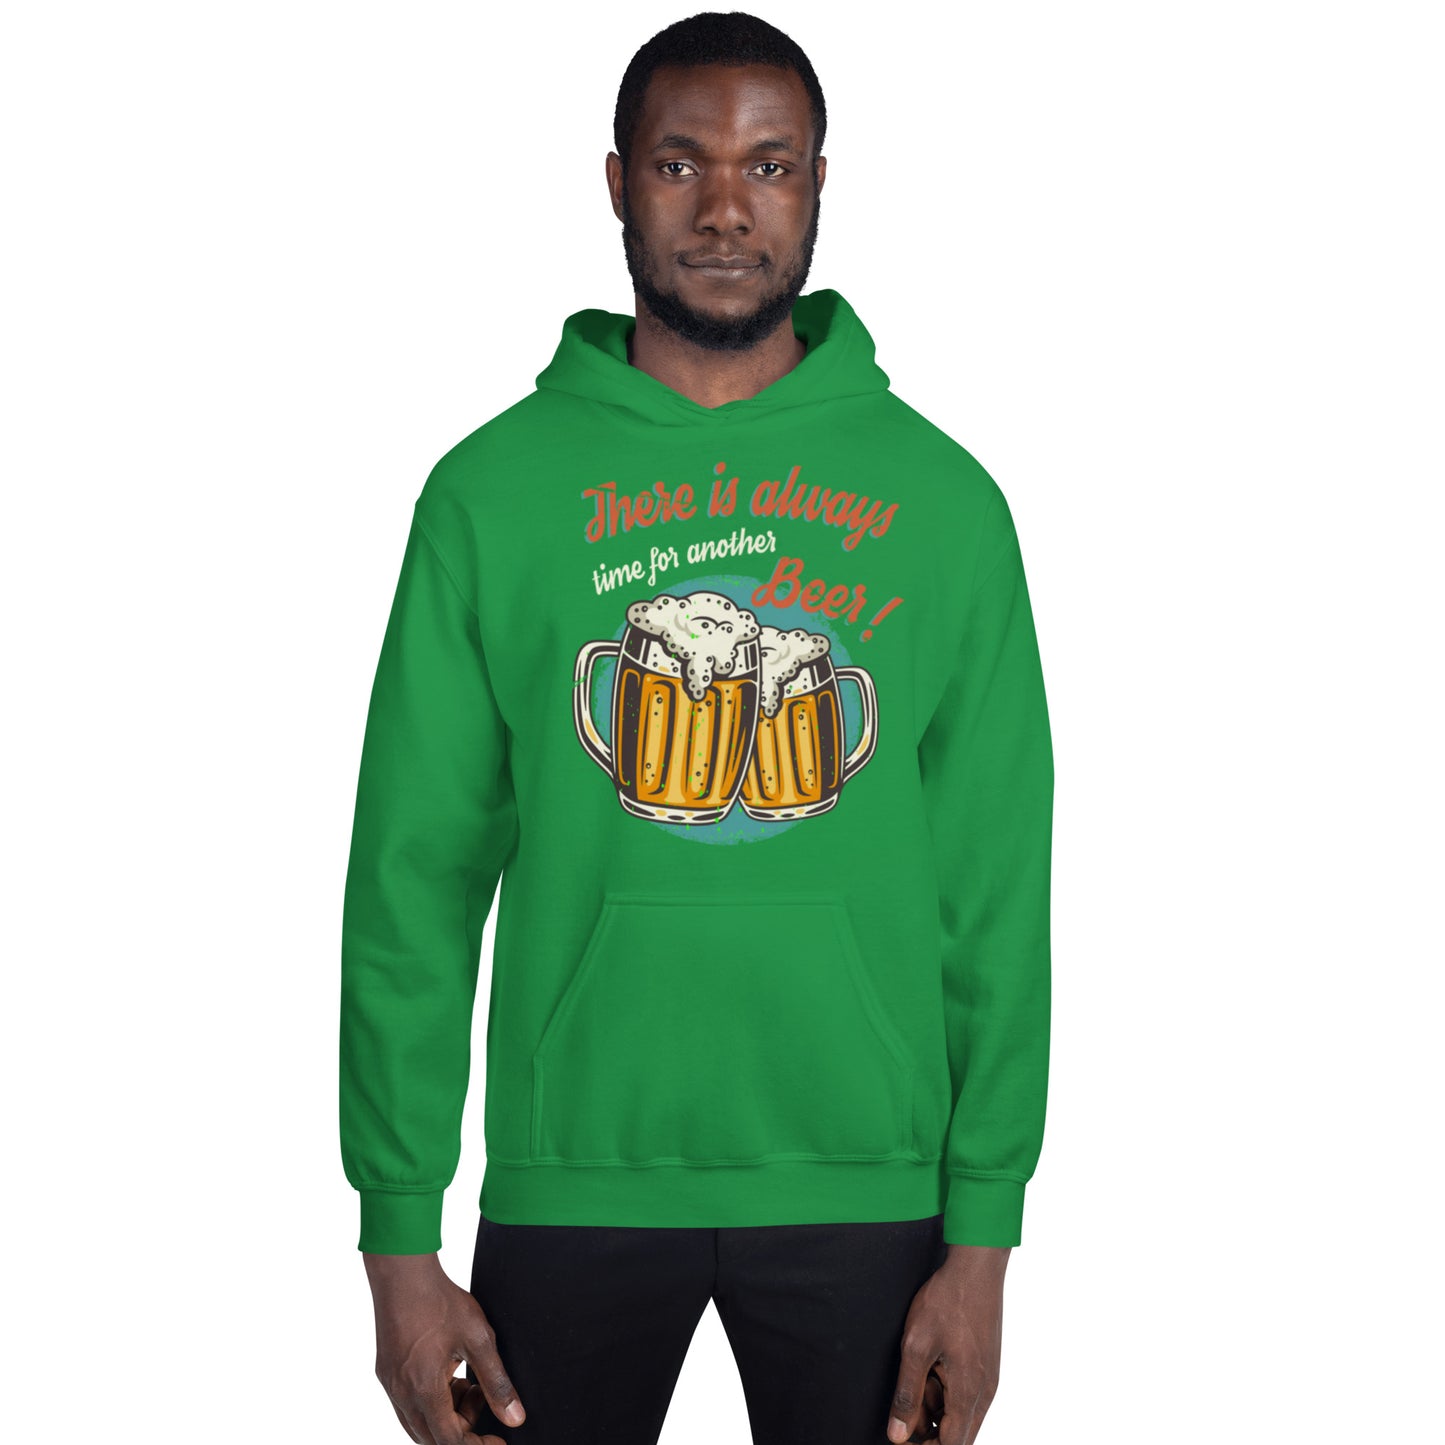 There is Always time for another Beer Unisex Hoodie